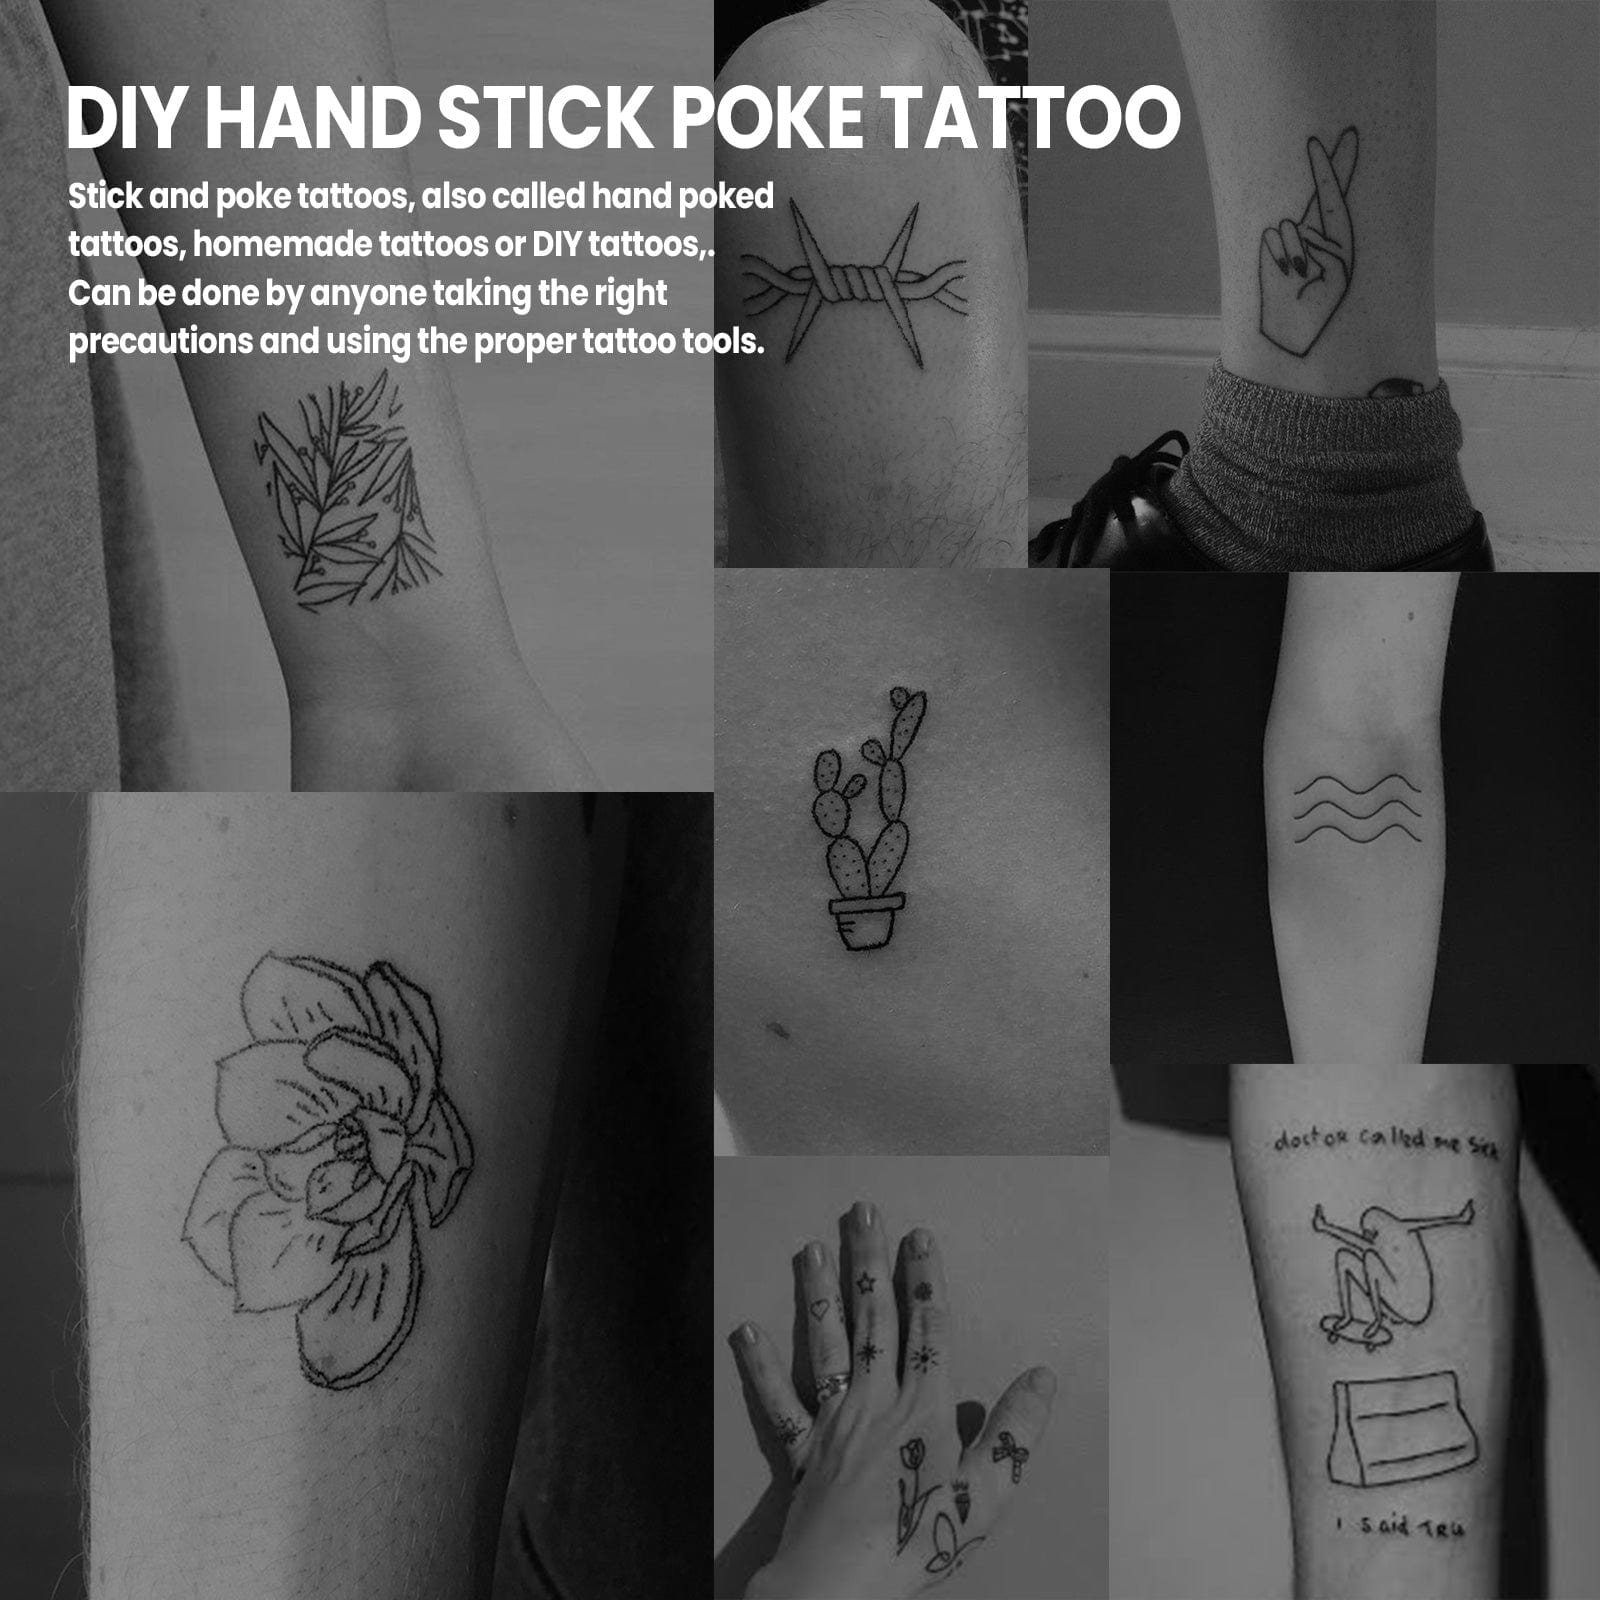 How to Make a Temporary Tattoo - AuthorityTattoo